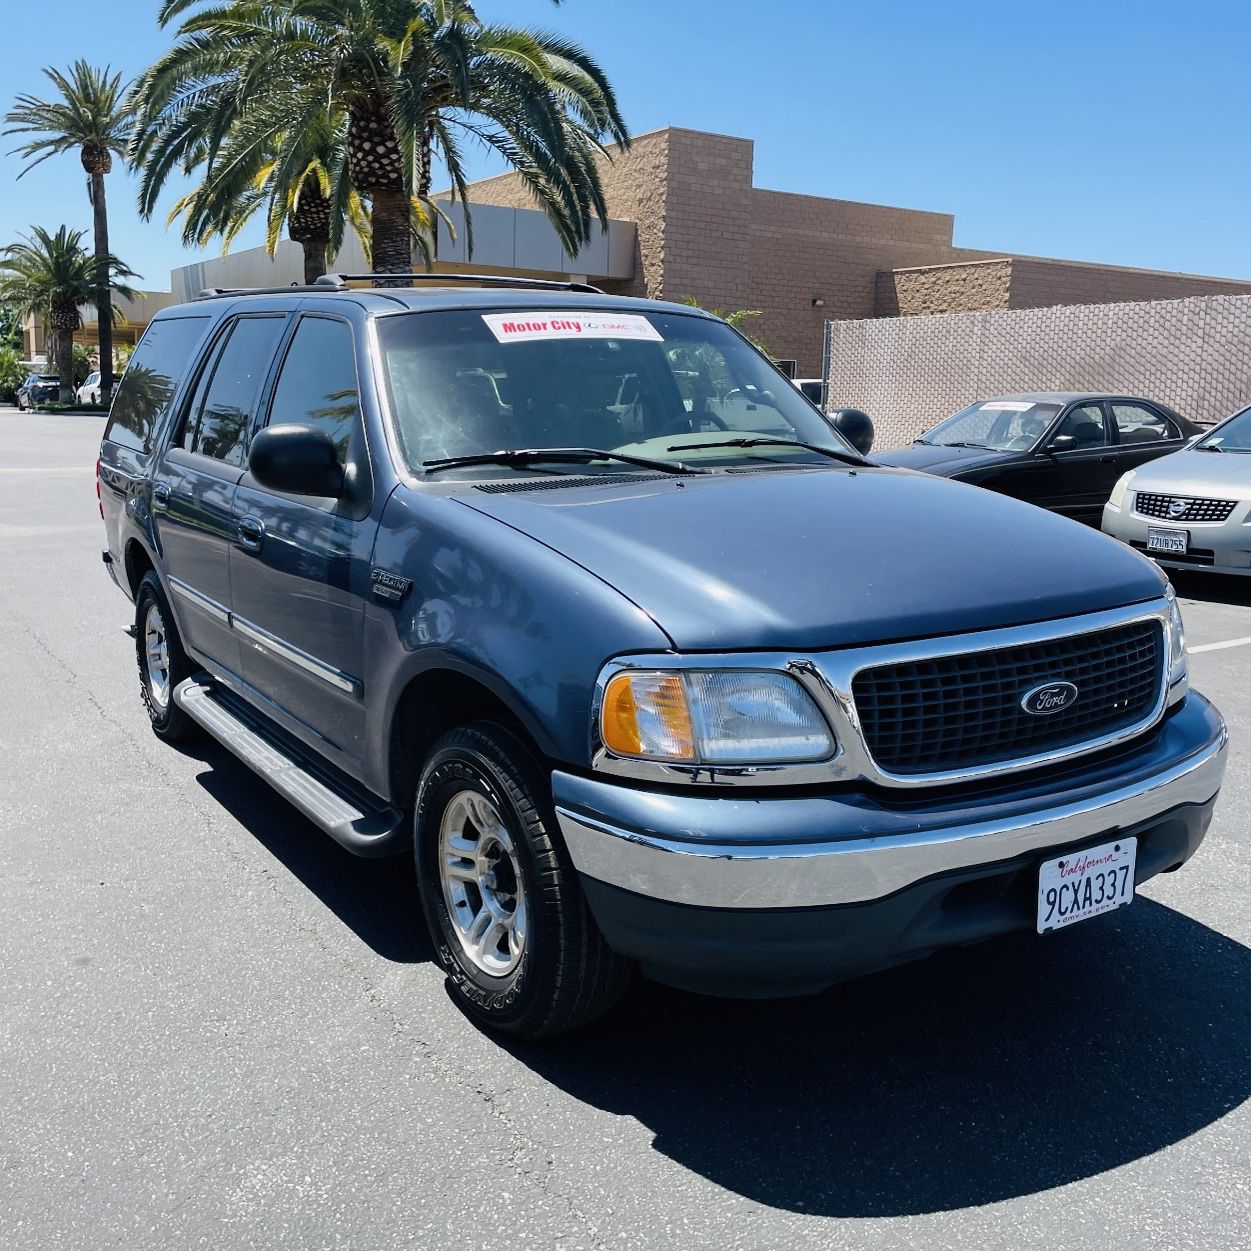 Ford Expedition XLT SUV  (One owner, great for family or camping)